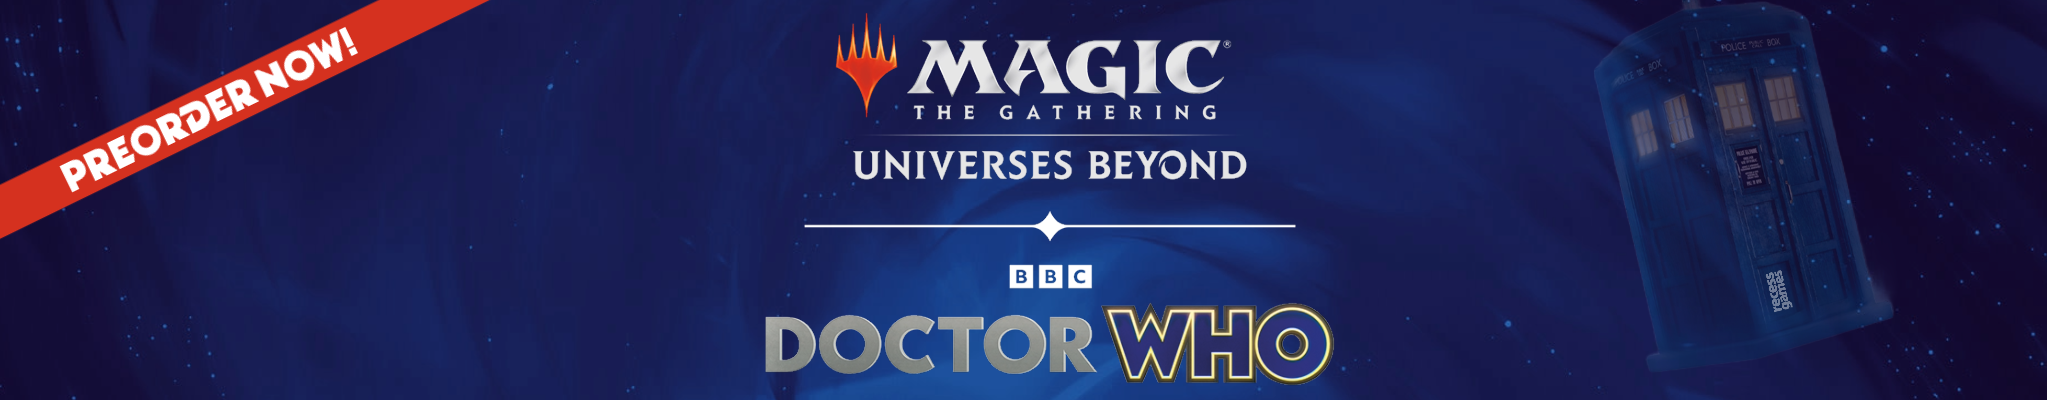 Doctor Who PreOrder Banner